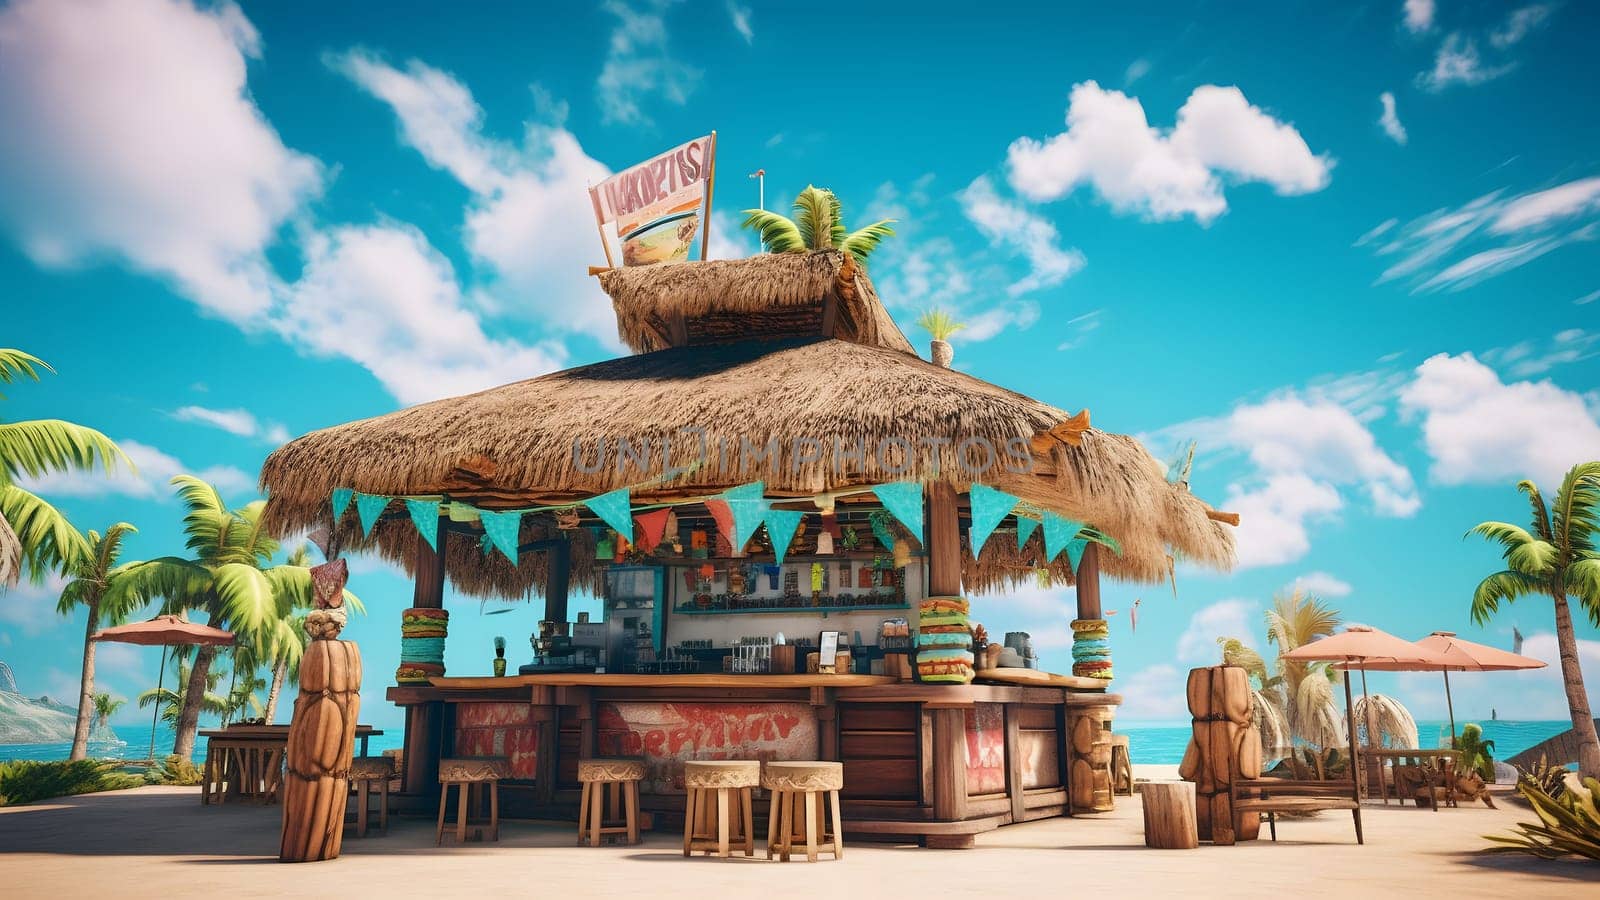 tiki bar on the beach with a palm tree and a blue sky with clouds in the background. Neural network generated in May 2023. Not based on any actual person, scene or pattern.